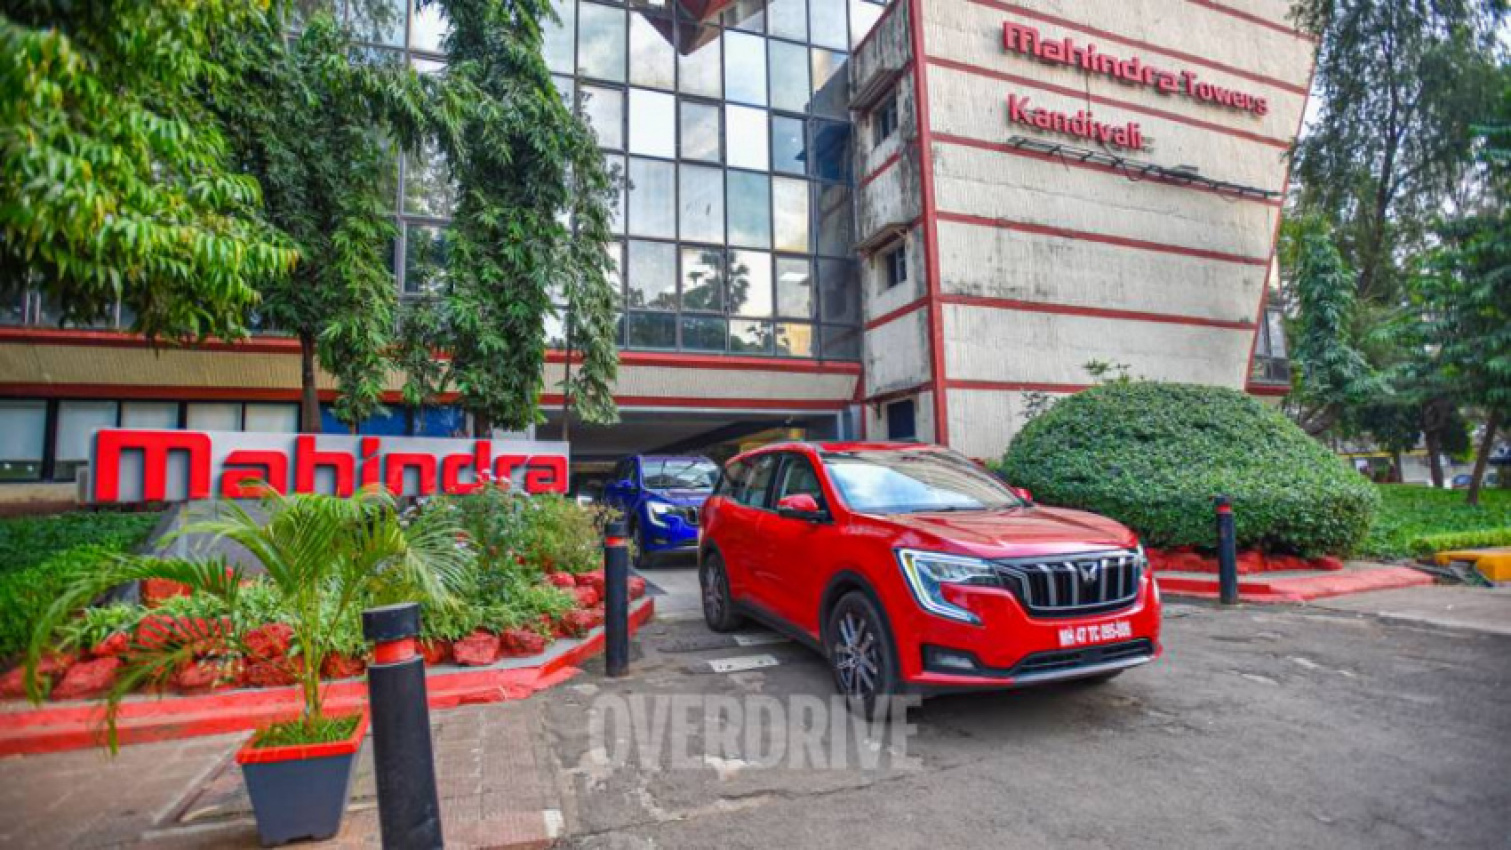 autos, cars, features, mahindra, mahinda xuv700, mahindra xuv700 7 seater price india, mahindra xuv700 awd price india 2021, mahindra xuv700 ax prices india 2021, mahindra xuv700 booking, mahindra xuv700 delivery date, mahindra xuv700 diesel delivery date, mahindra xuv700 images, mahindra xuv700 interior, mahindra xuv700 launch date, mahindra xuv700 luxury pack price india 2021, mahindra xuv700 petrol delivery date, mahindra xuv700 petrol top speed, mahindra xuv700 rann of kutch, mahindra xuv700 road trip, mahindra xuv700 top speed run, overdrive, overdrive 700 episode, vnex, xuv 700, xuv700 price, mahindra xuv700 on the rann of kutch - our 700 special!